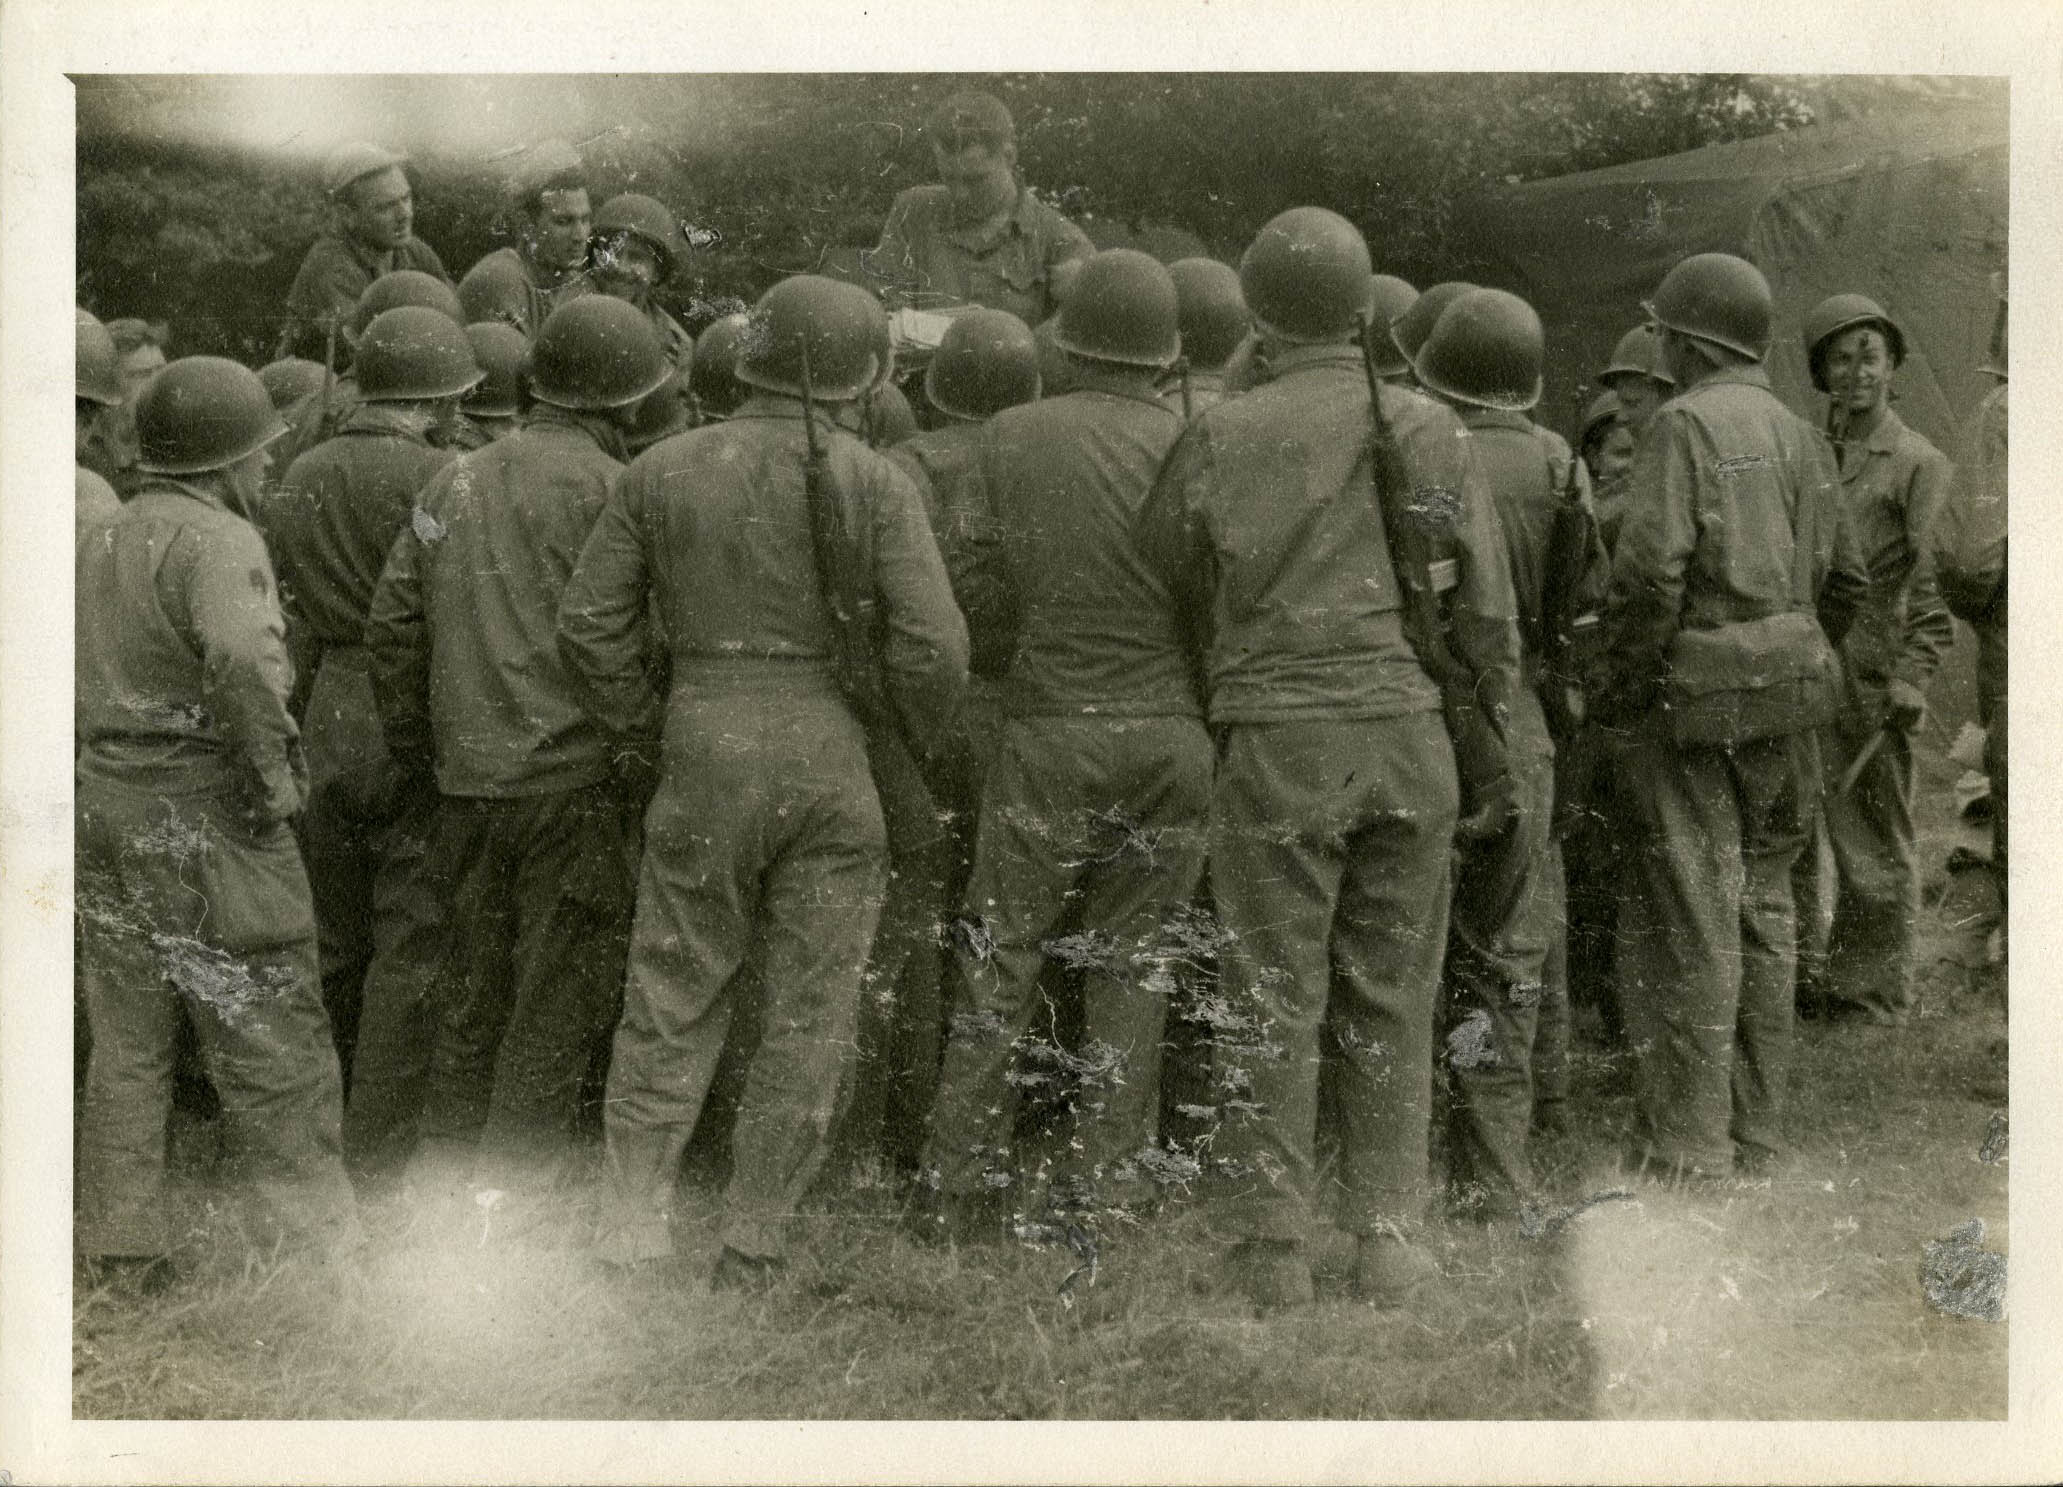 August 1944, unidentified location in France. Photograph taken by James W. Wall.